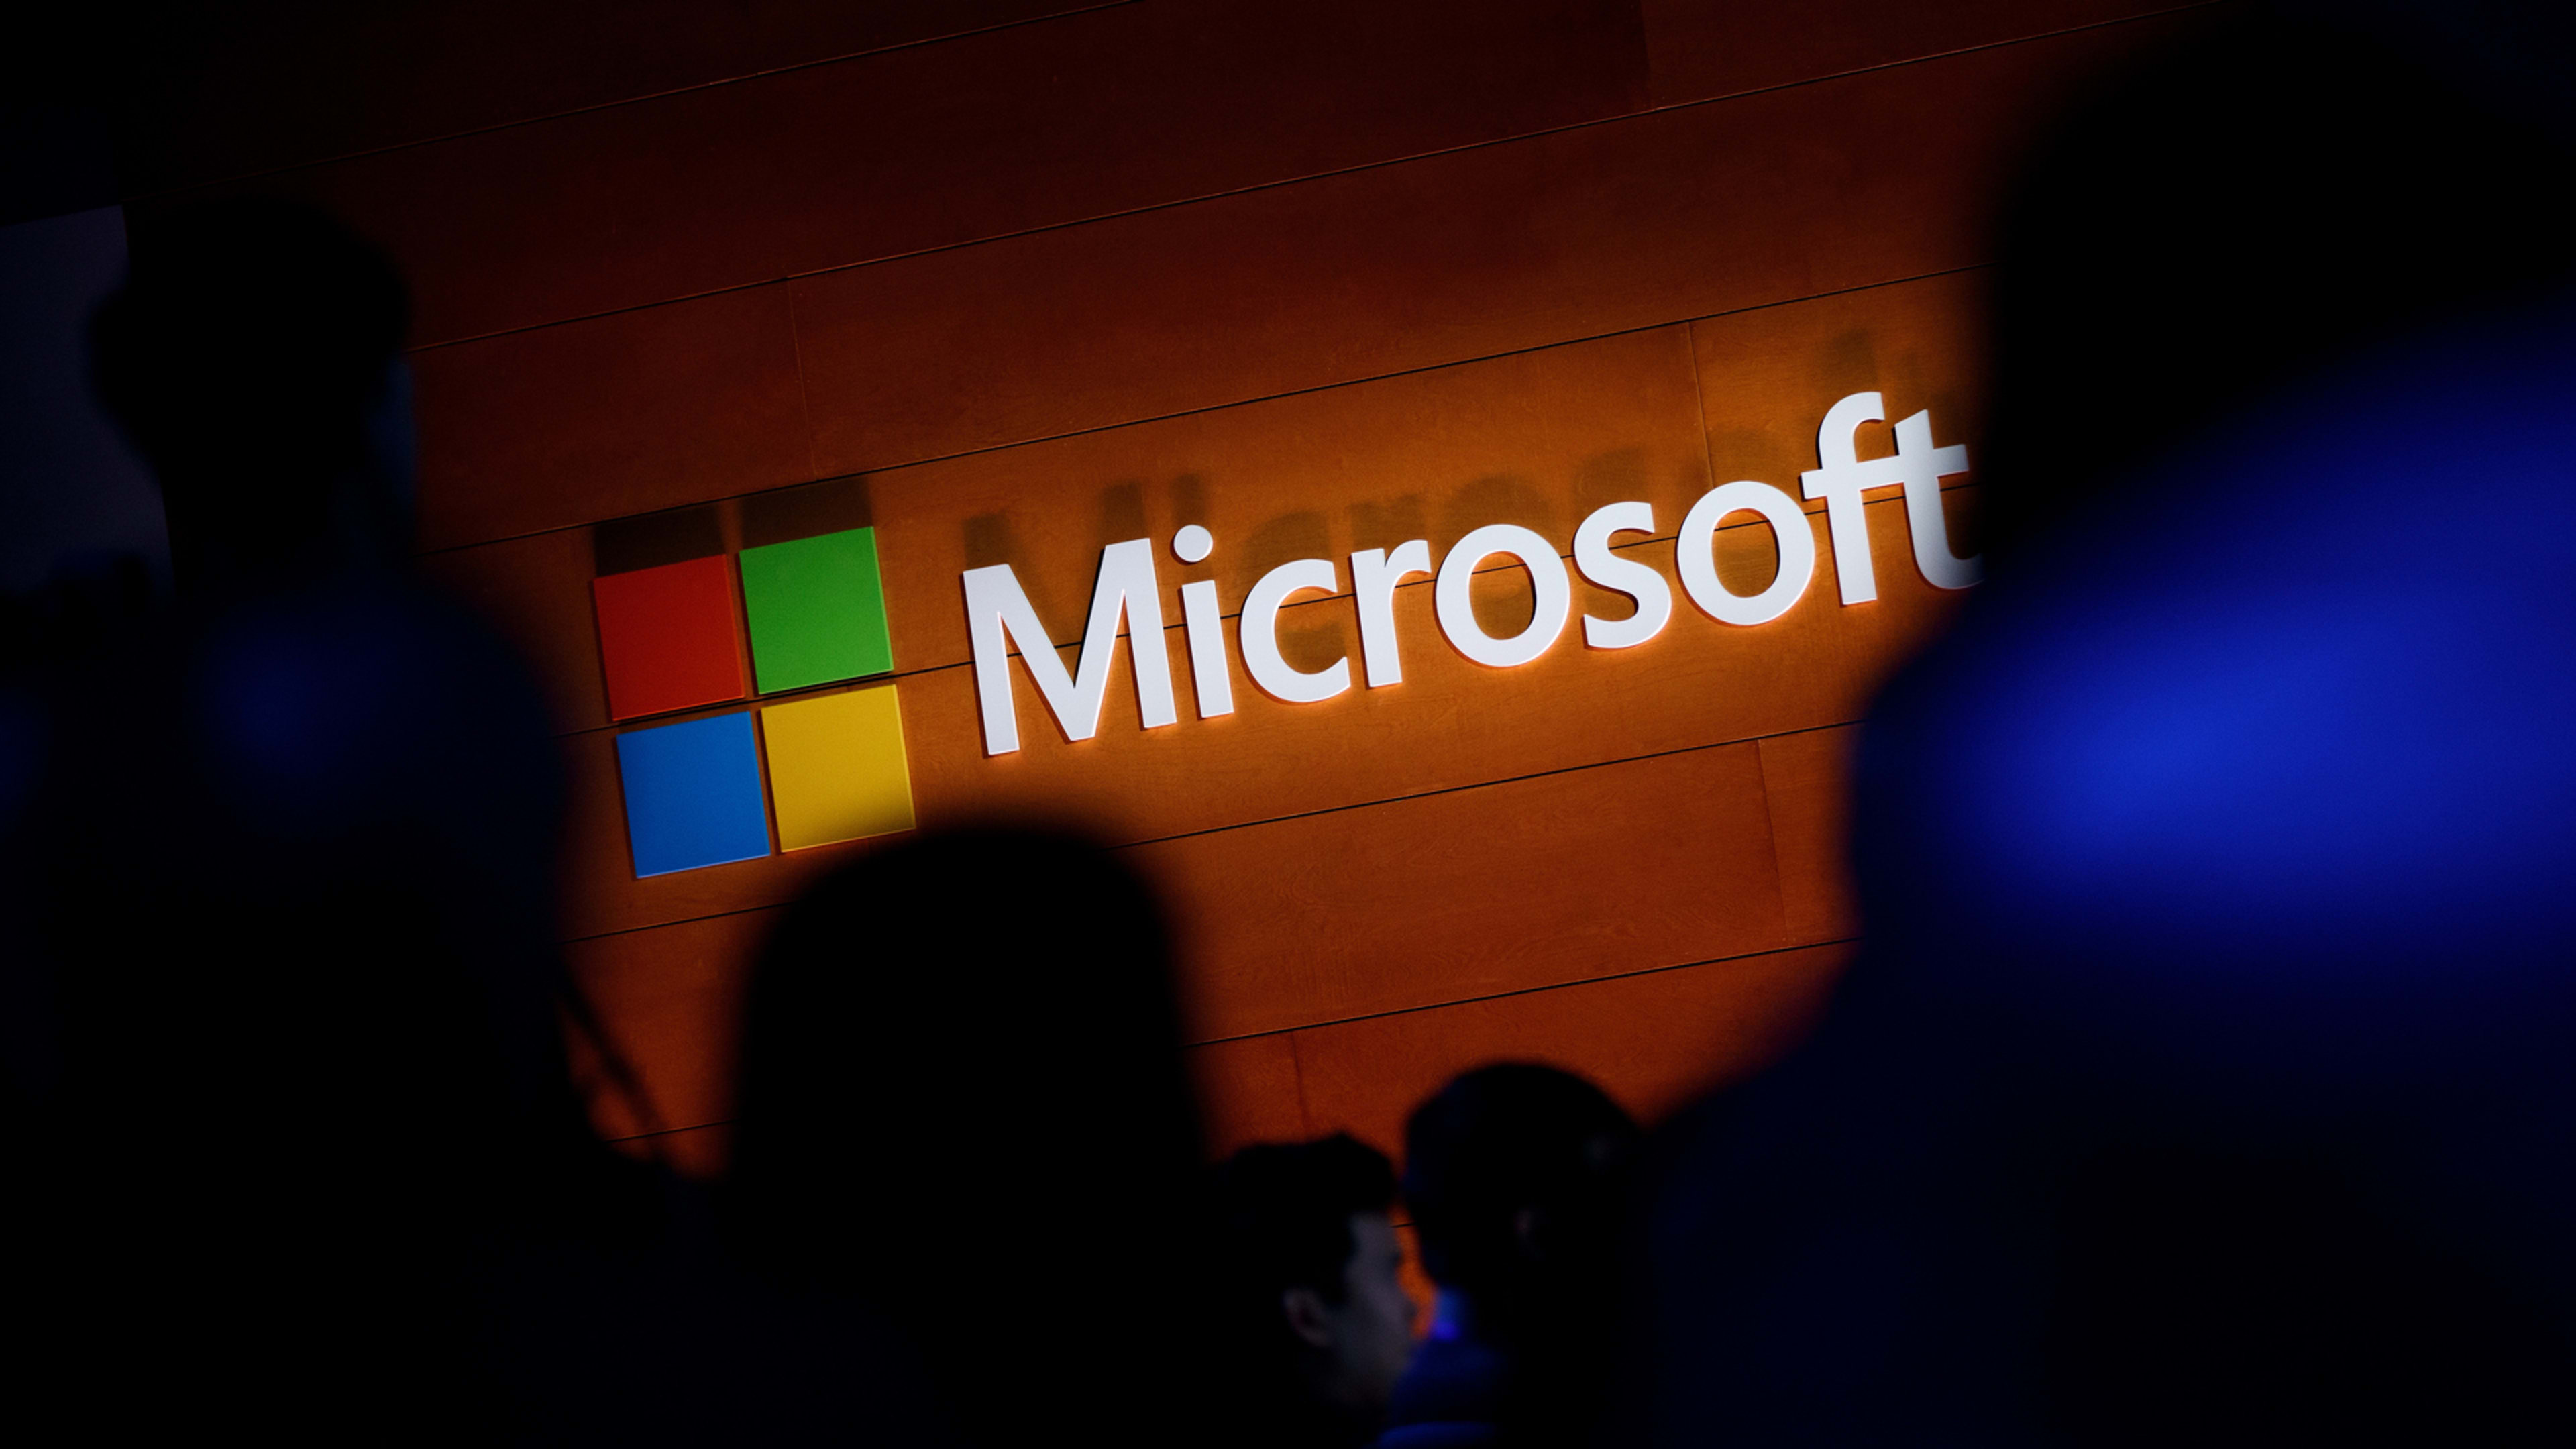 How Microsoft has (so far) avoided tough scrutiny over privacy issues